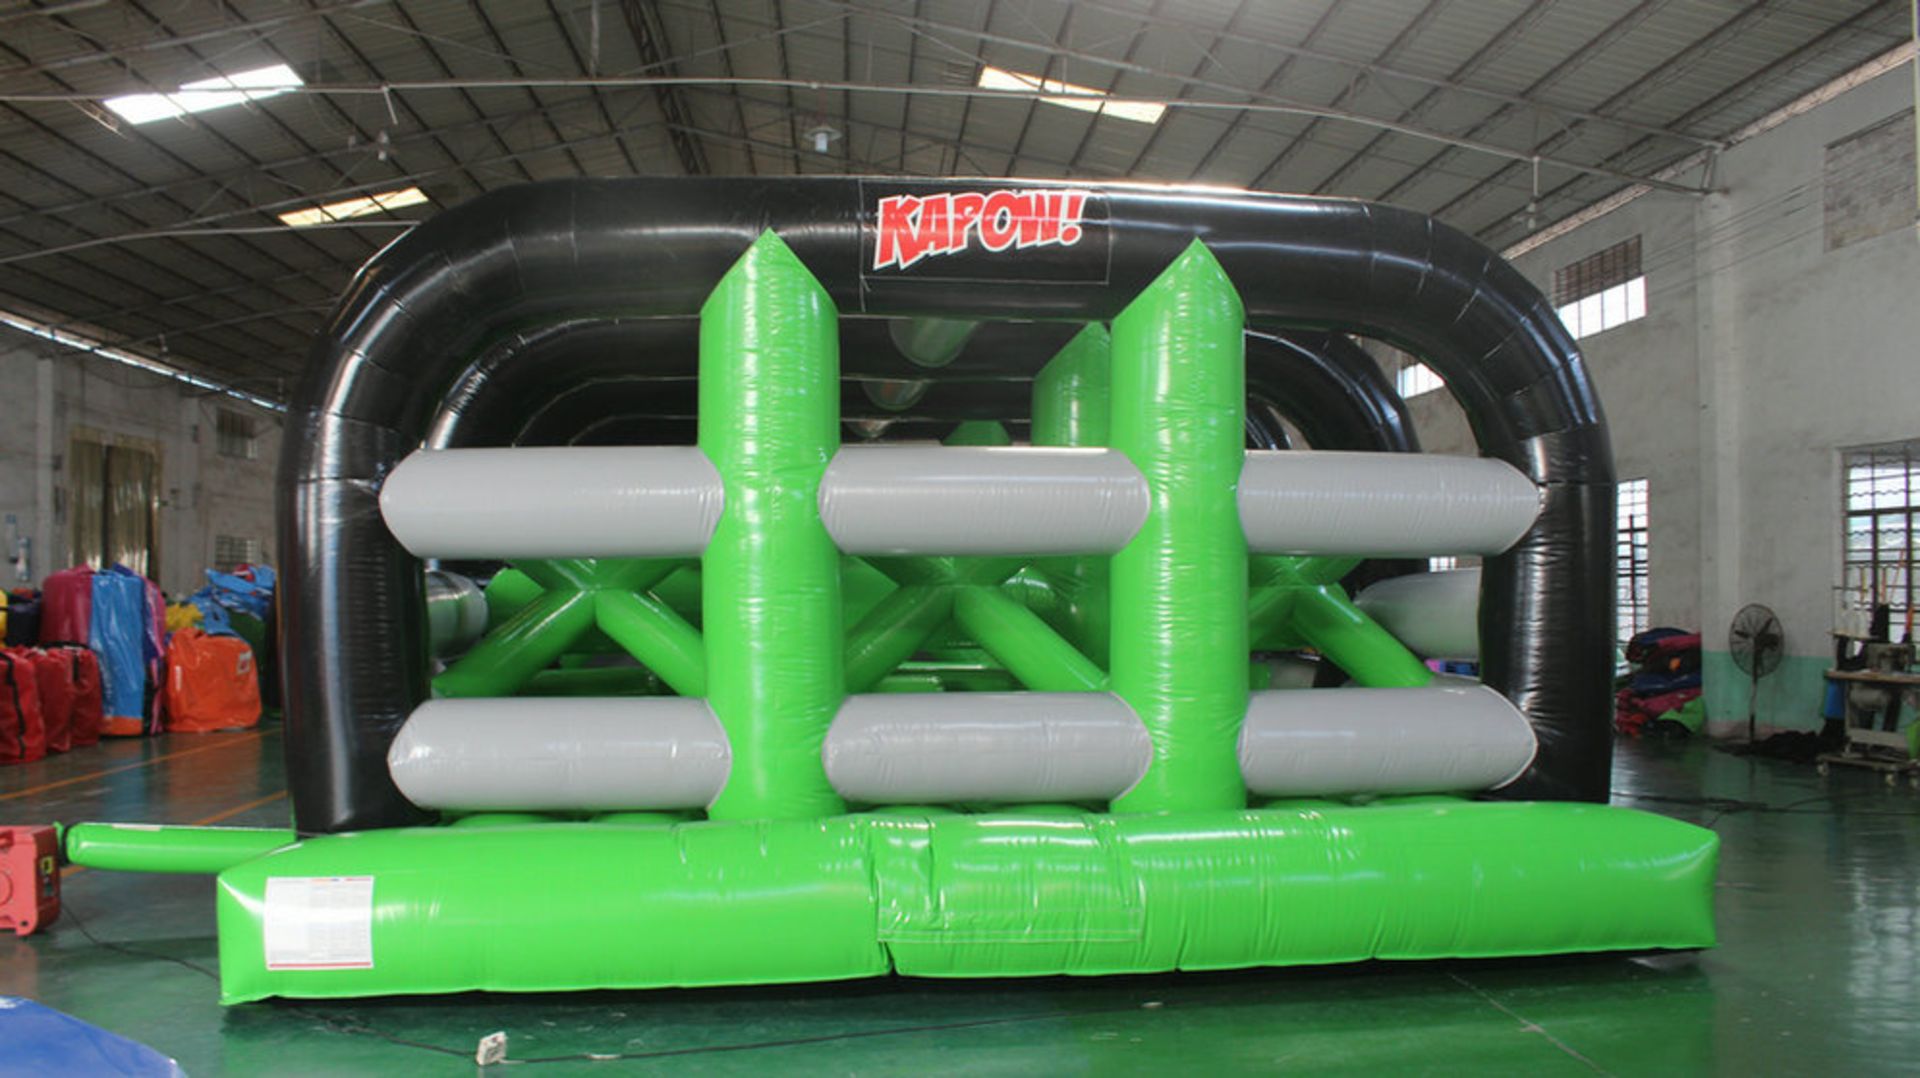 Kapow Inflatable Obstacle course, comprising 12 as - Image 4 of 46